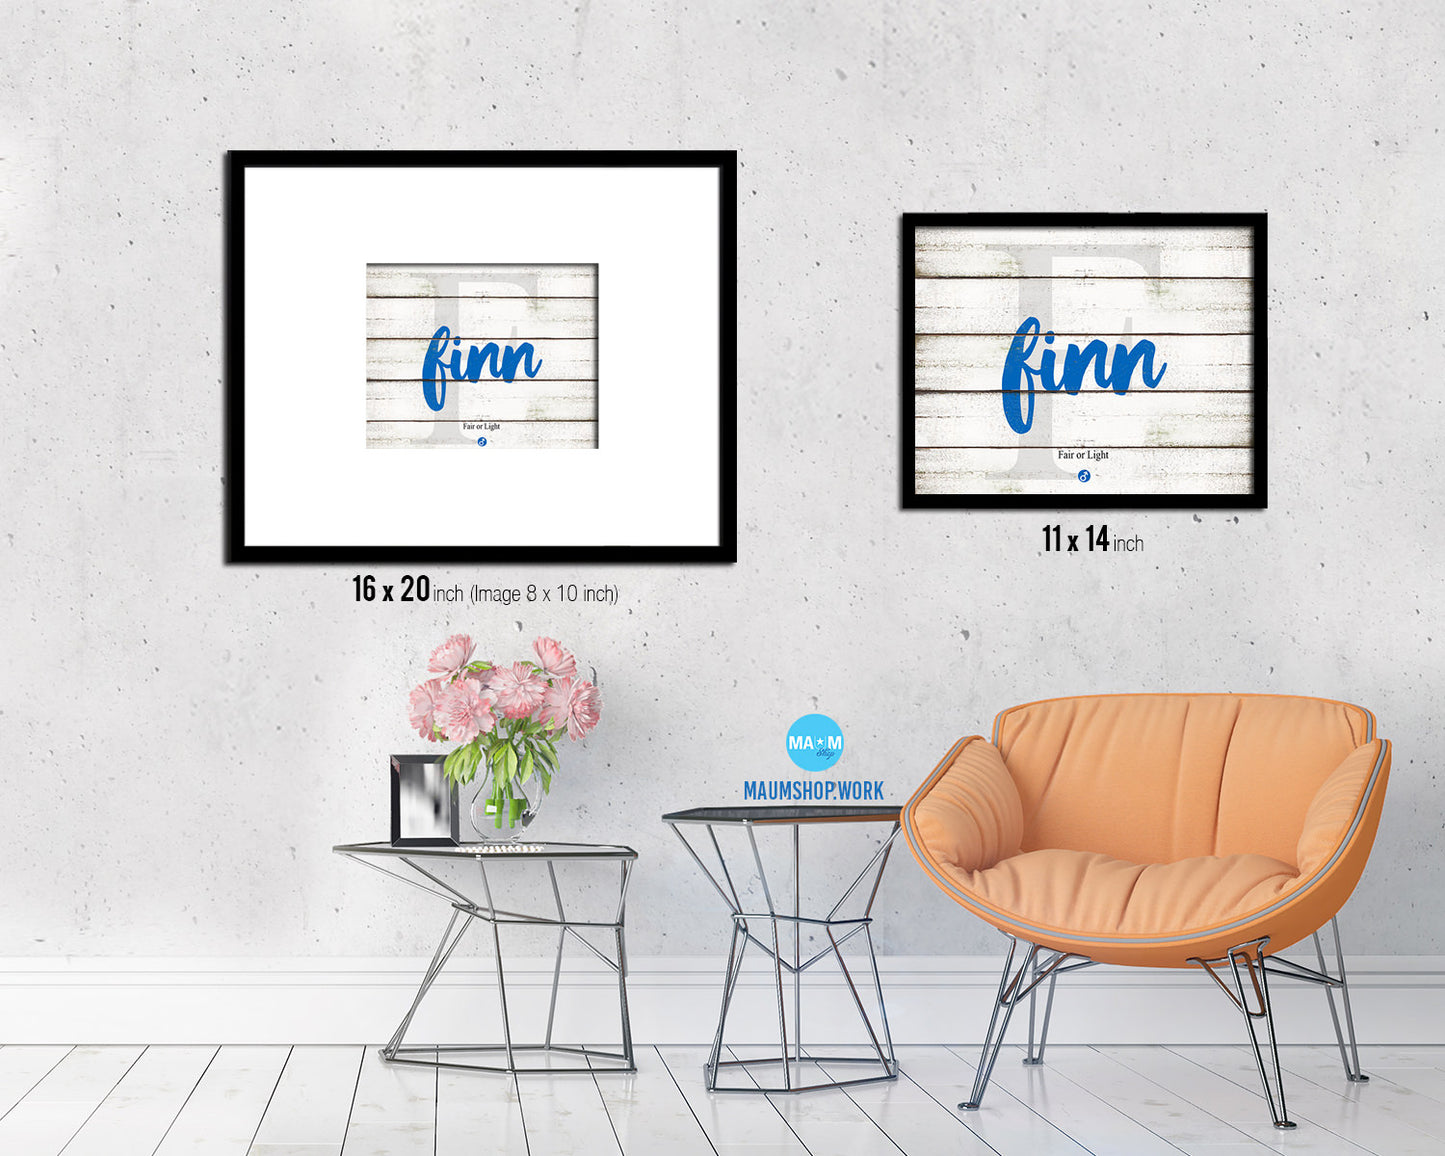 Finn Personalized Biblical Name Plate Art Framed Print Kids Baby Room Wall Decor Gifts